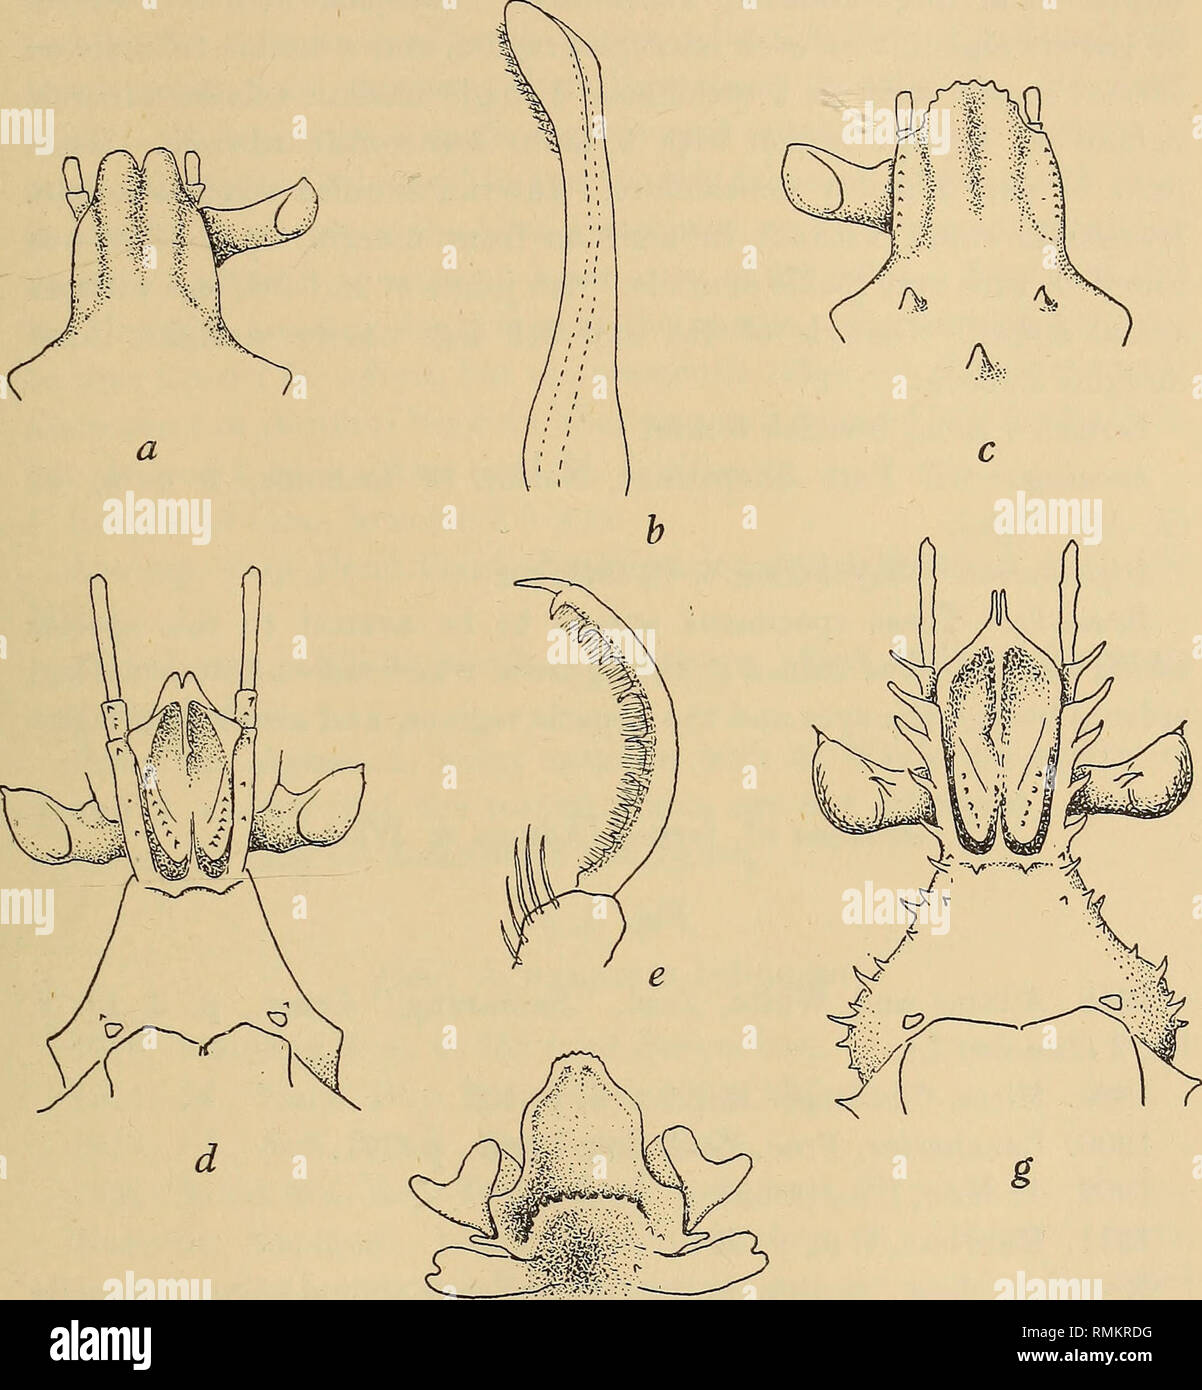 . Annals of the South African Museum = Annale van die Suid-Afrikaanse Museum. Natural history. Descriptive Catalogue of South African Decapod Crustacea. 21. / Fig. 3.—Achaeus lacertosus Stimpson. a, rostrum &lt;$. b, ventral view of left 1st pleopod $ (curves inwards towards its fellow). Achaeus cf. laevioculis Miers. c, rostrum $. Achaeus cf. affinis Miers. d, ventral surface of rostrum &lt;J. e, dactyl of 4th or 5th leg (some setae on apex of 6th joint omitted). /, sternum $ between chelipeds. Achaeus cf. lorina (Ad. &amp; White), g, ventral surface of rostrum &lt;£. (In d and g only basal j Stock Photo